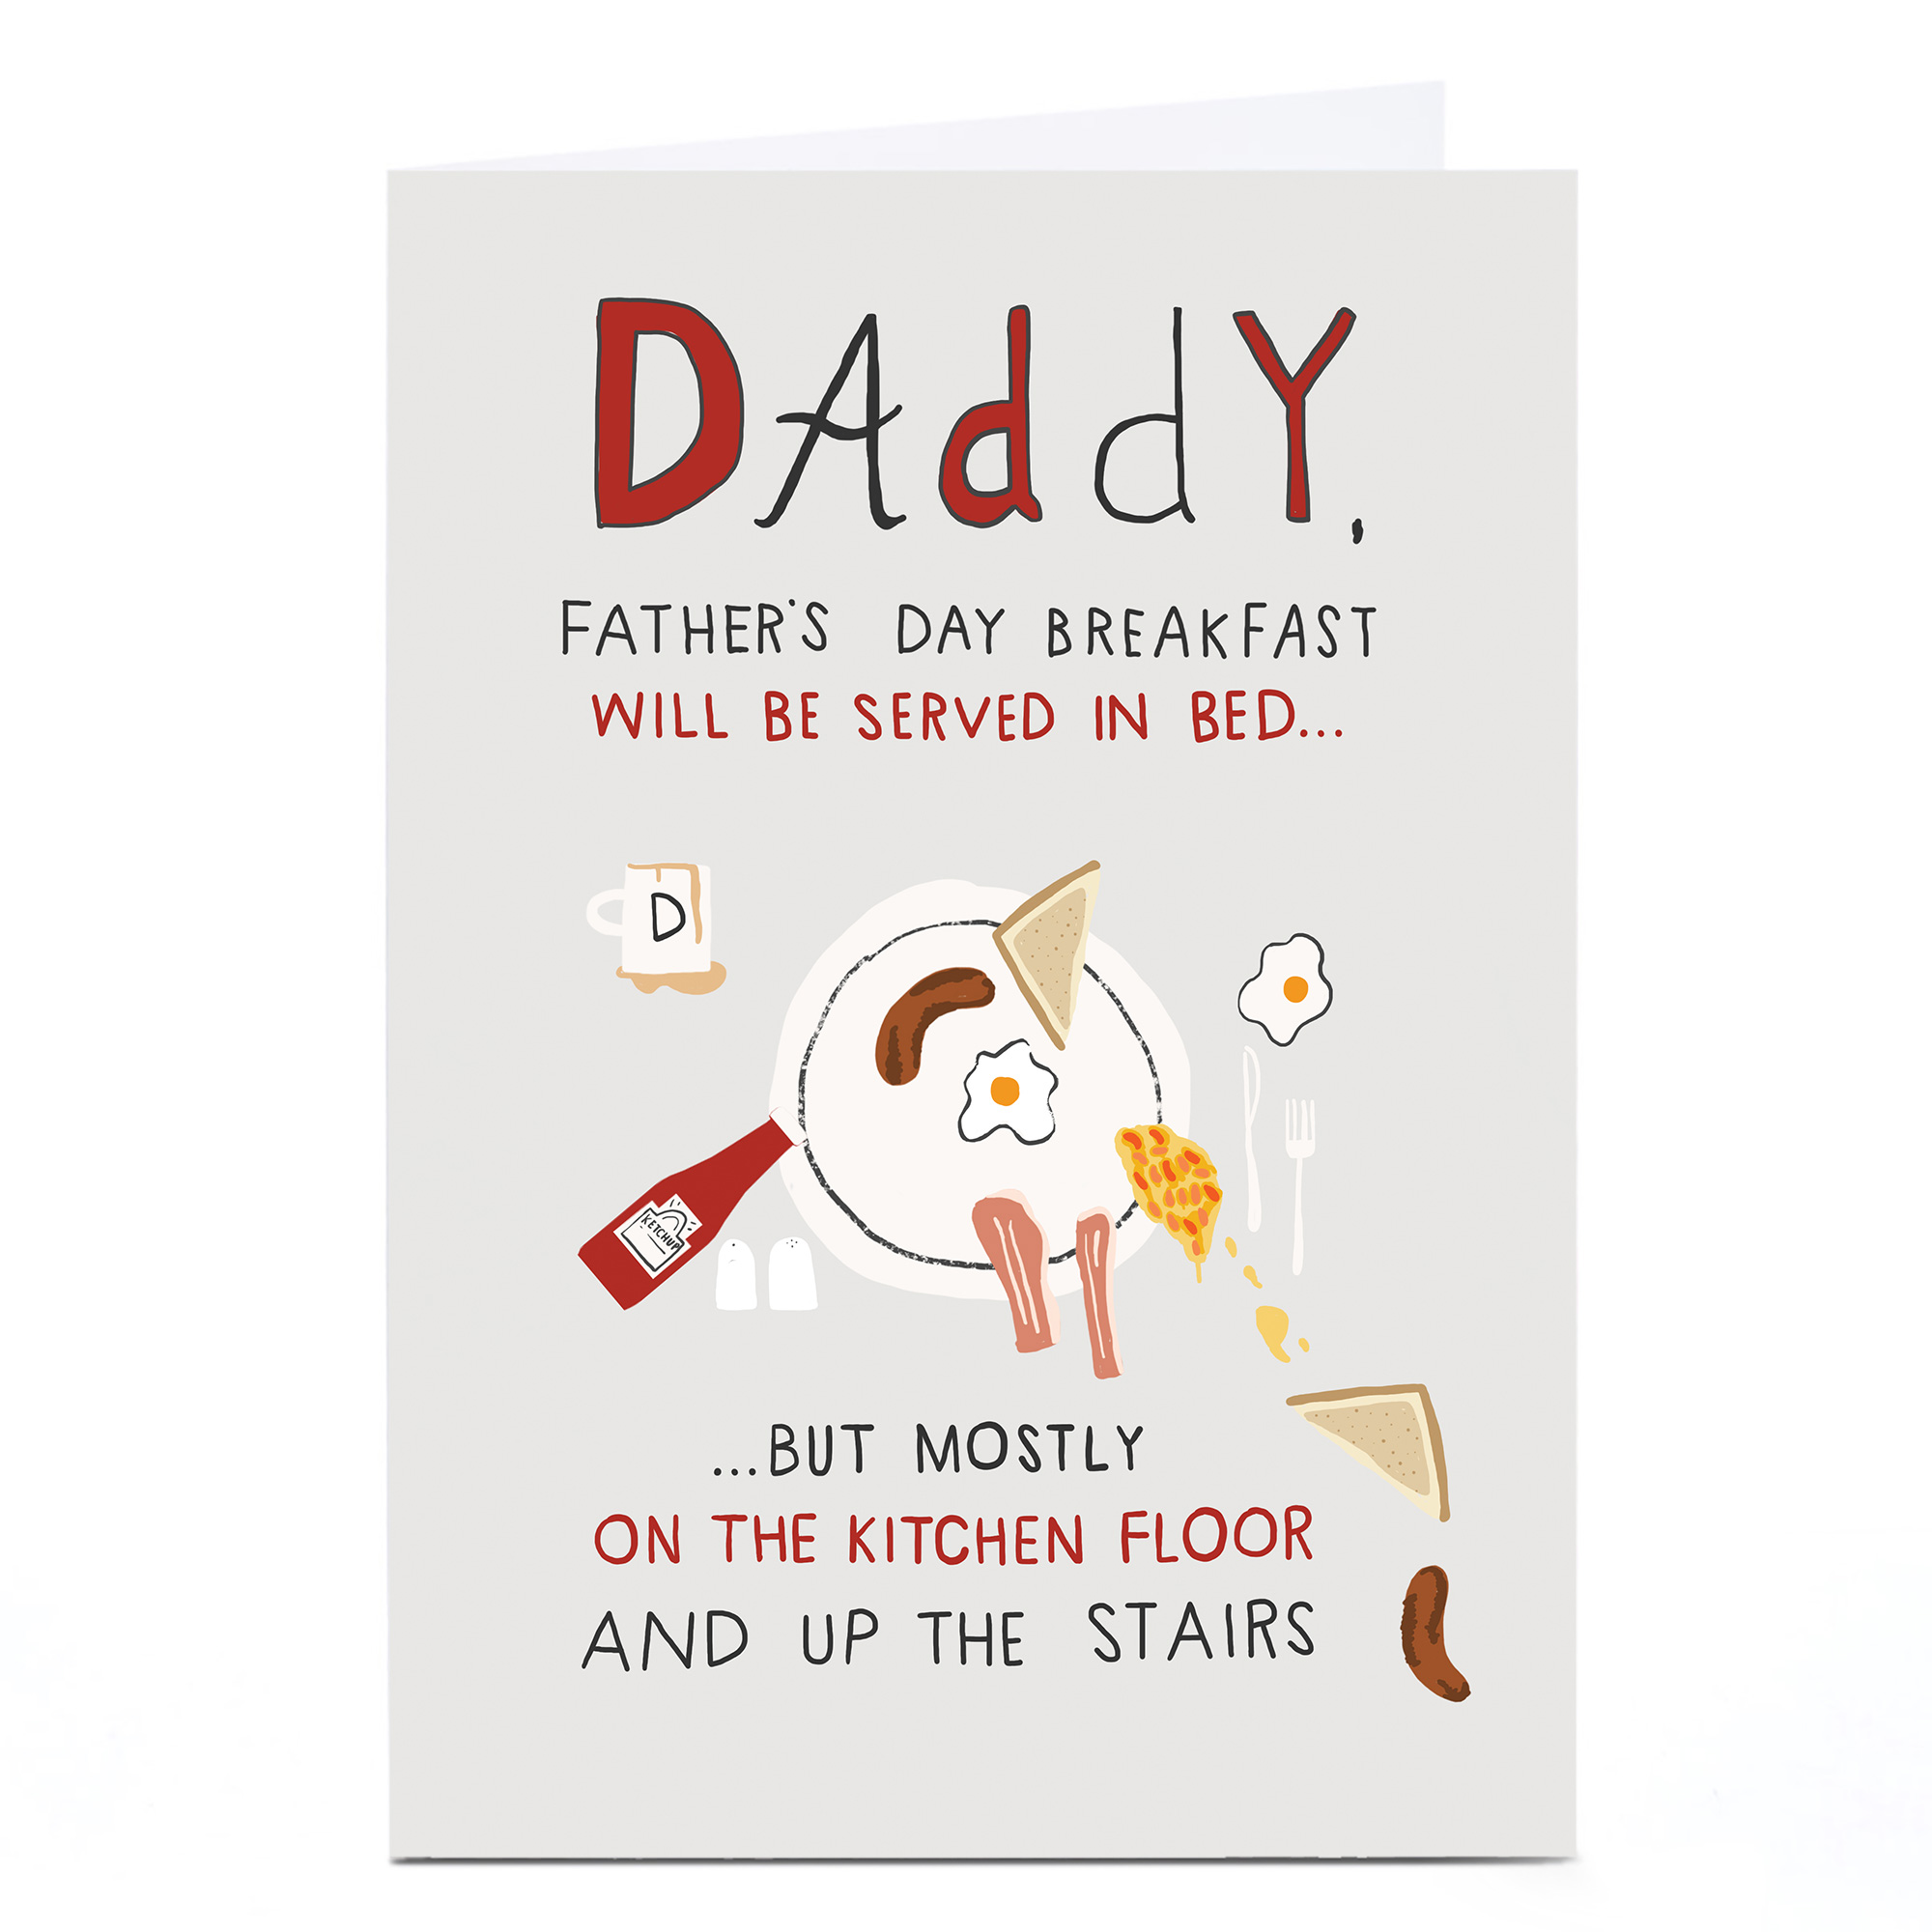 Personalised Father's Day Card - Daddy, Breakfast In Bed